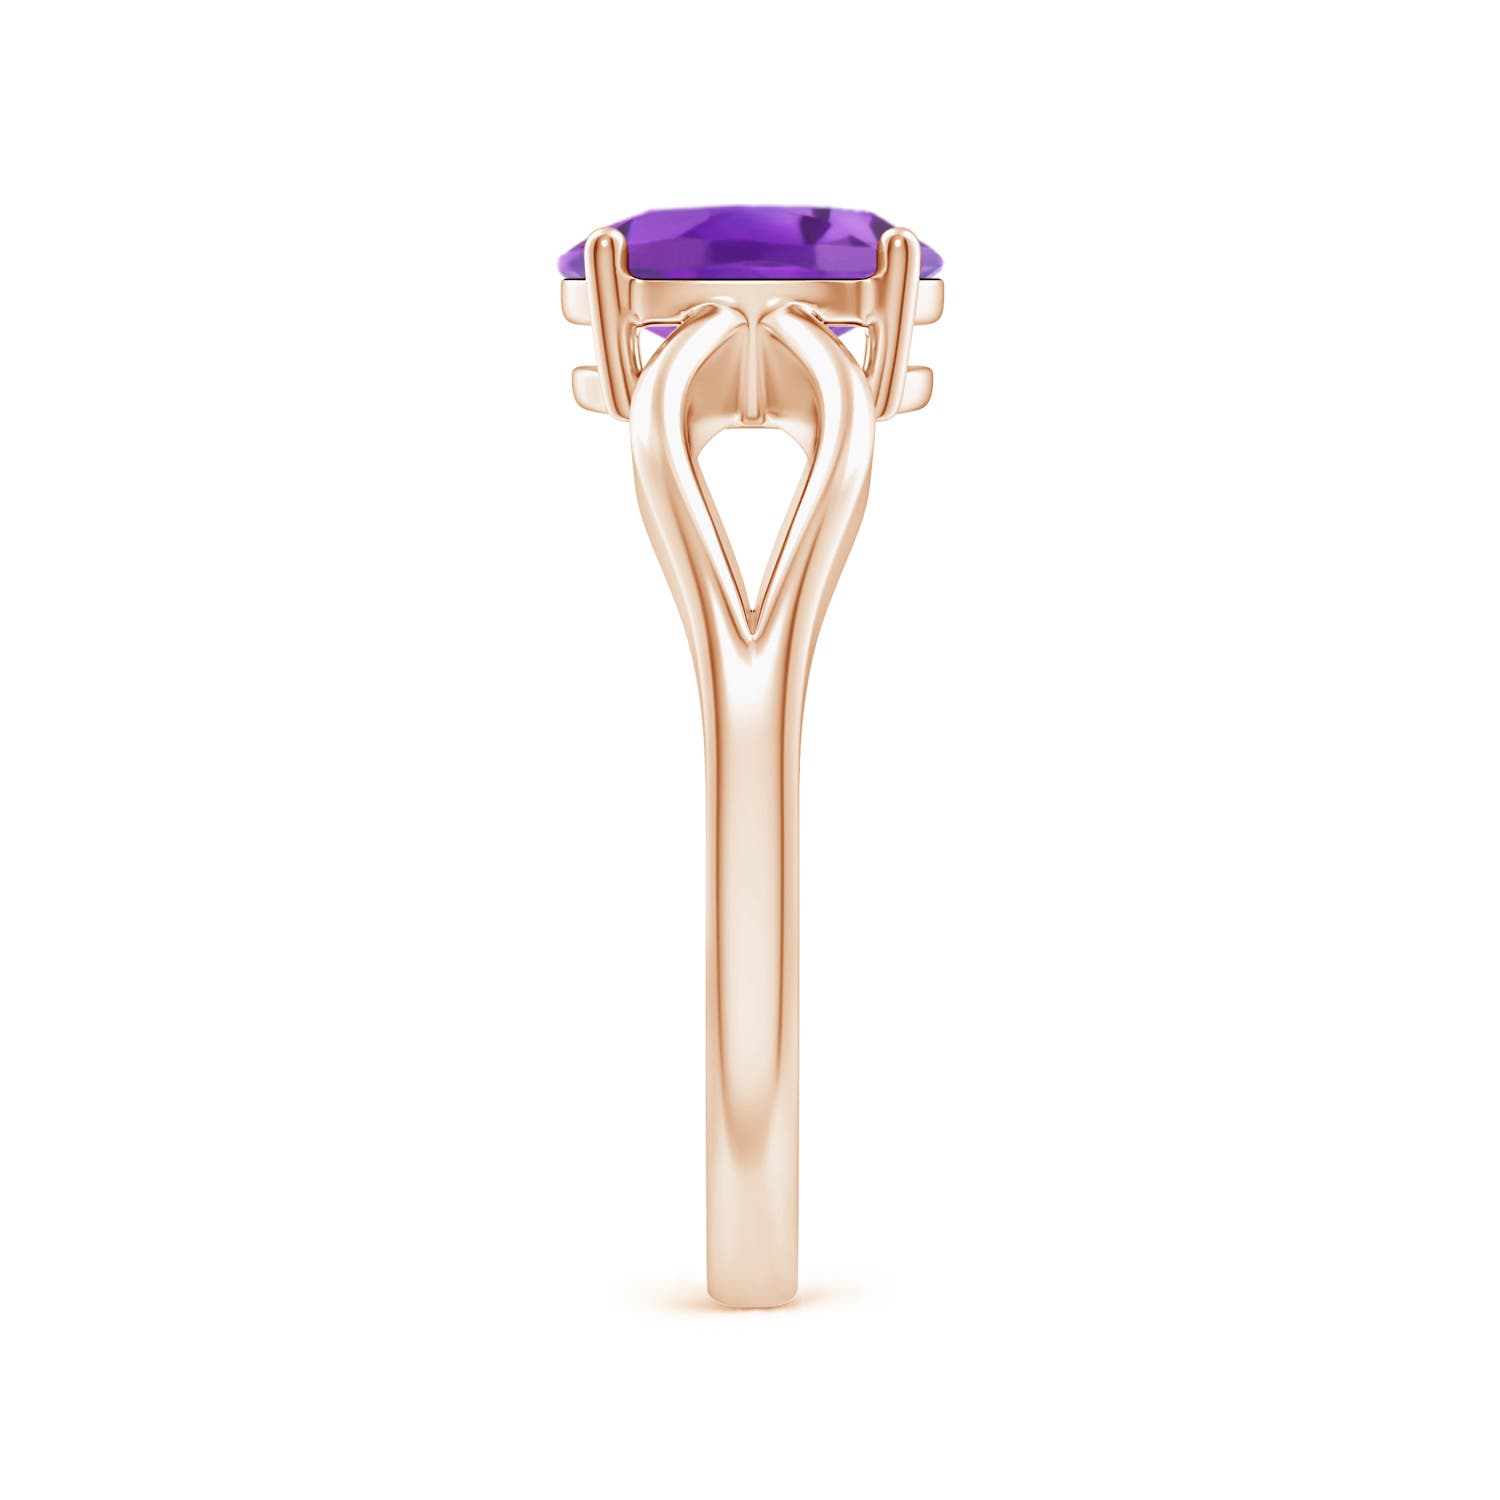 AA - Amethyst / 1.15 CT / 14 KT Rose Gold